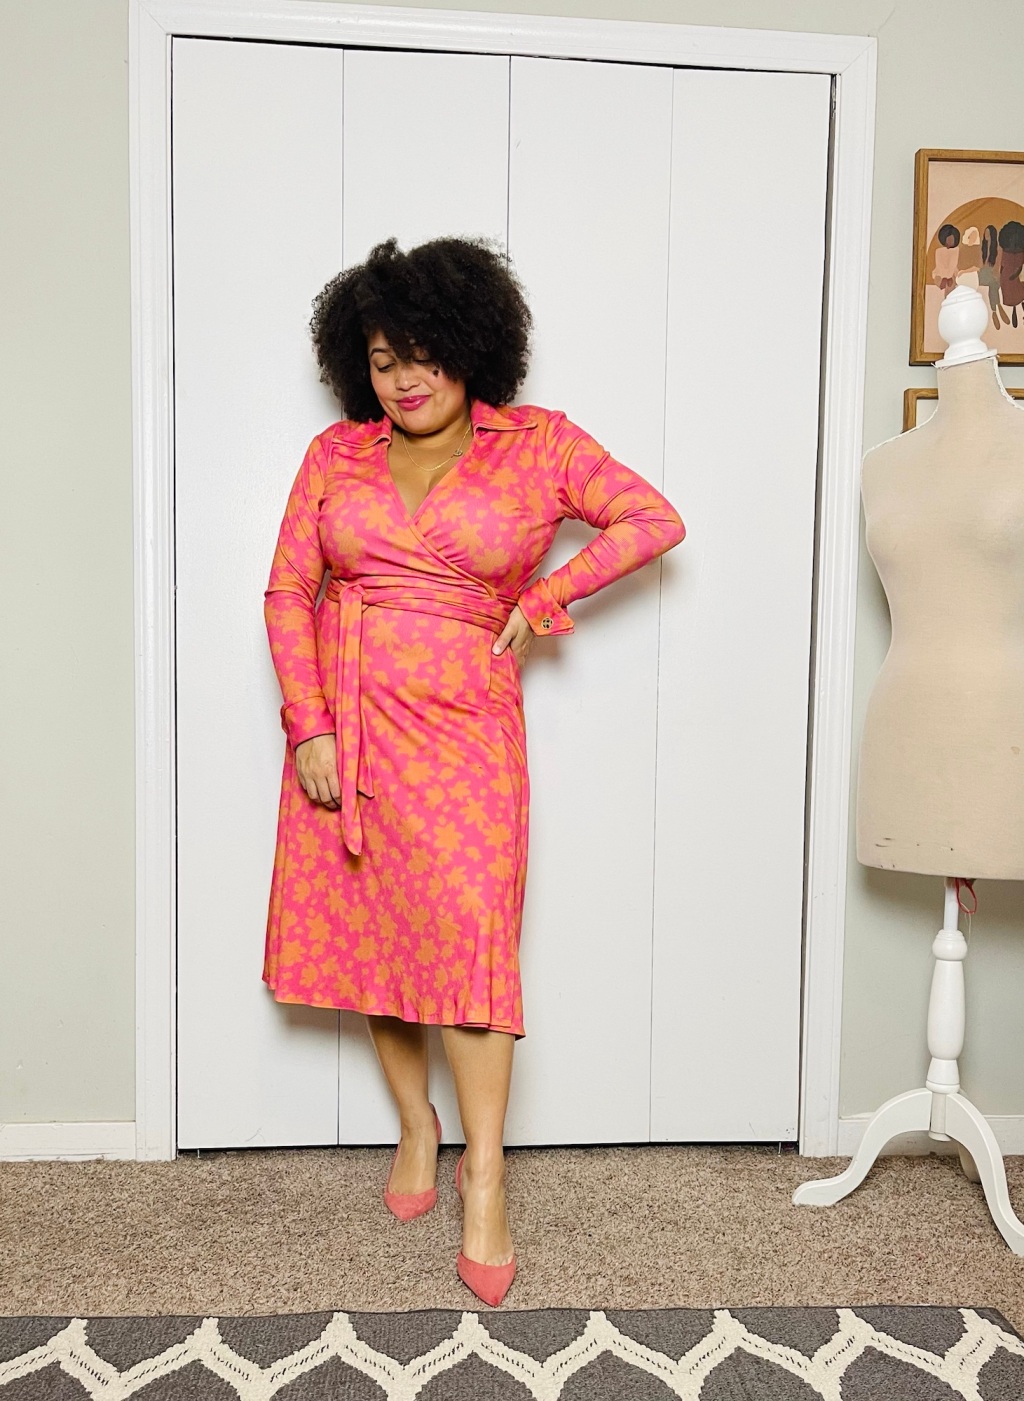 I made the DVF wrap dress by Vogue Patterns!